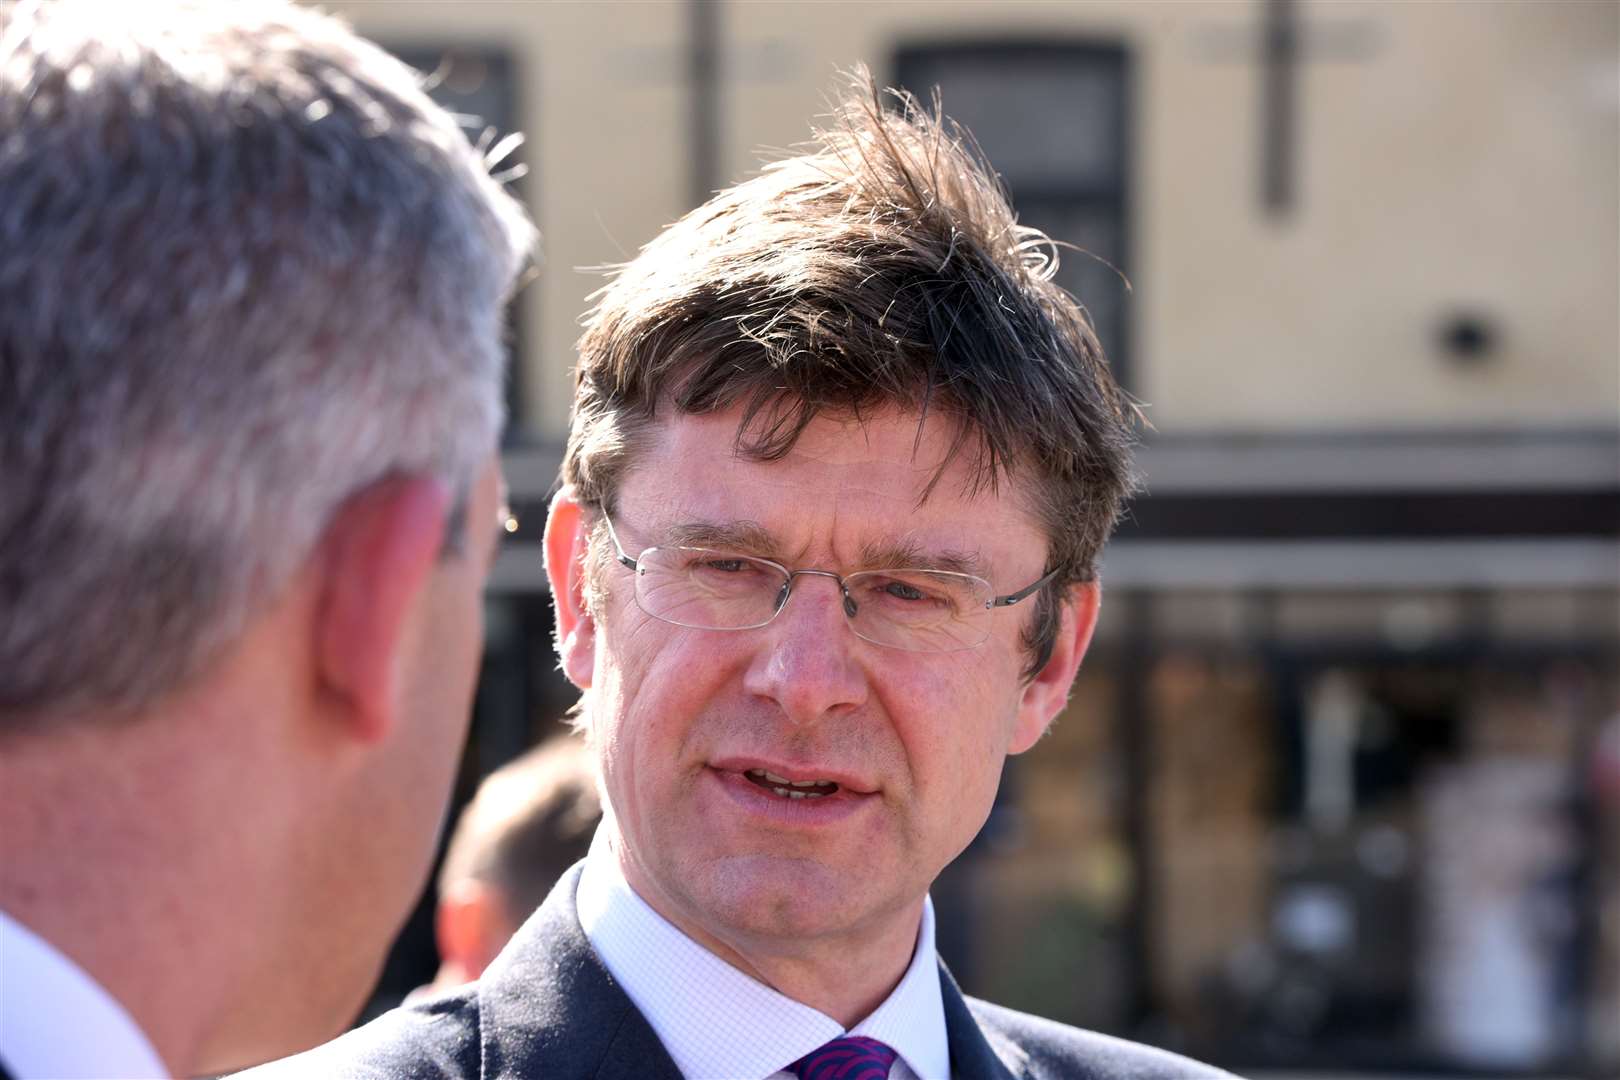 The Lib Dems are struggling to unseat Conservative Greg Clark in Tunbridge Wells